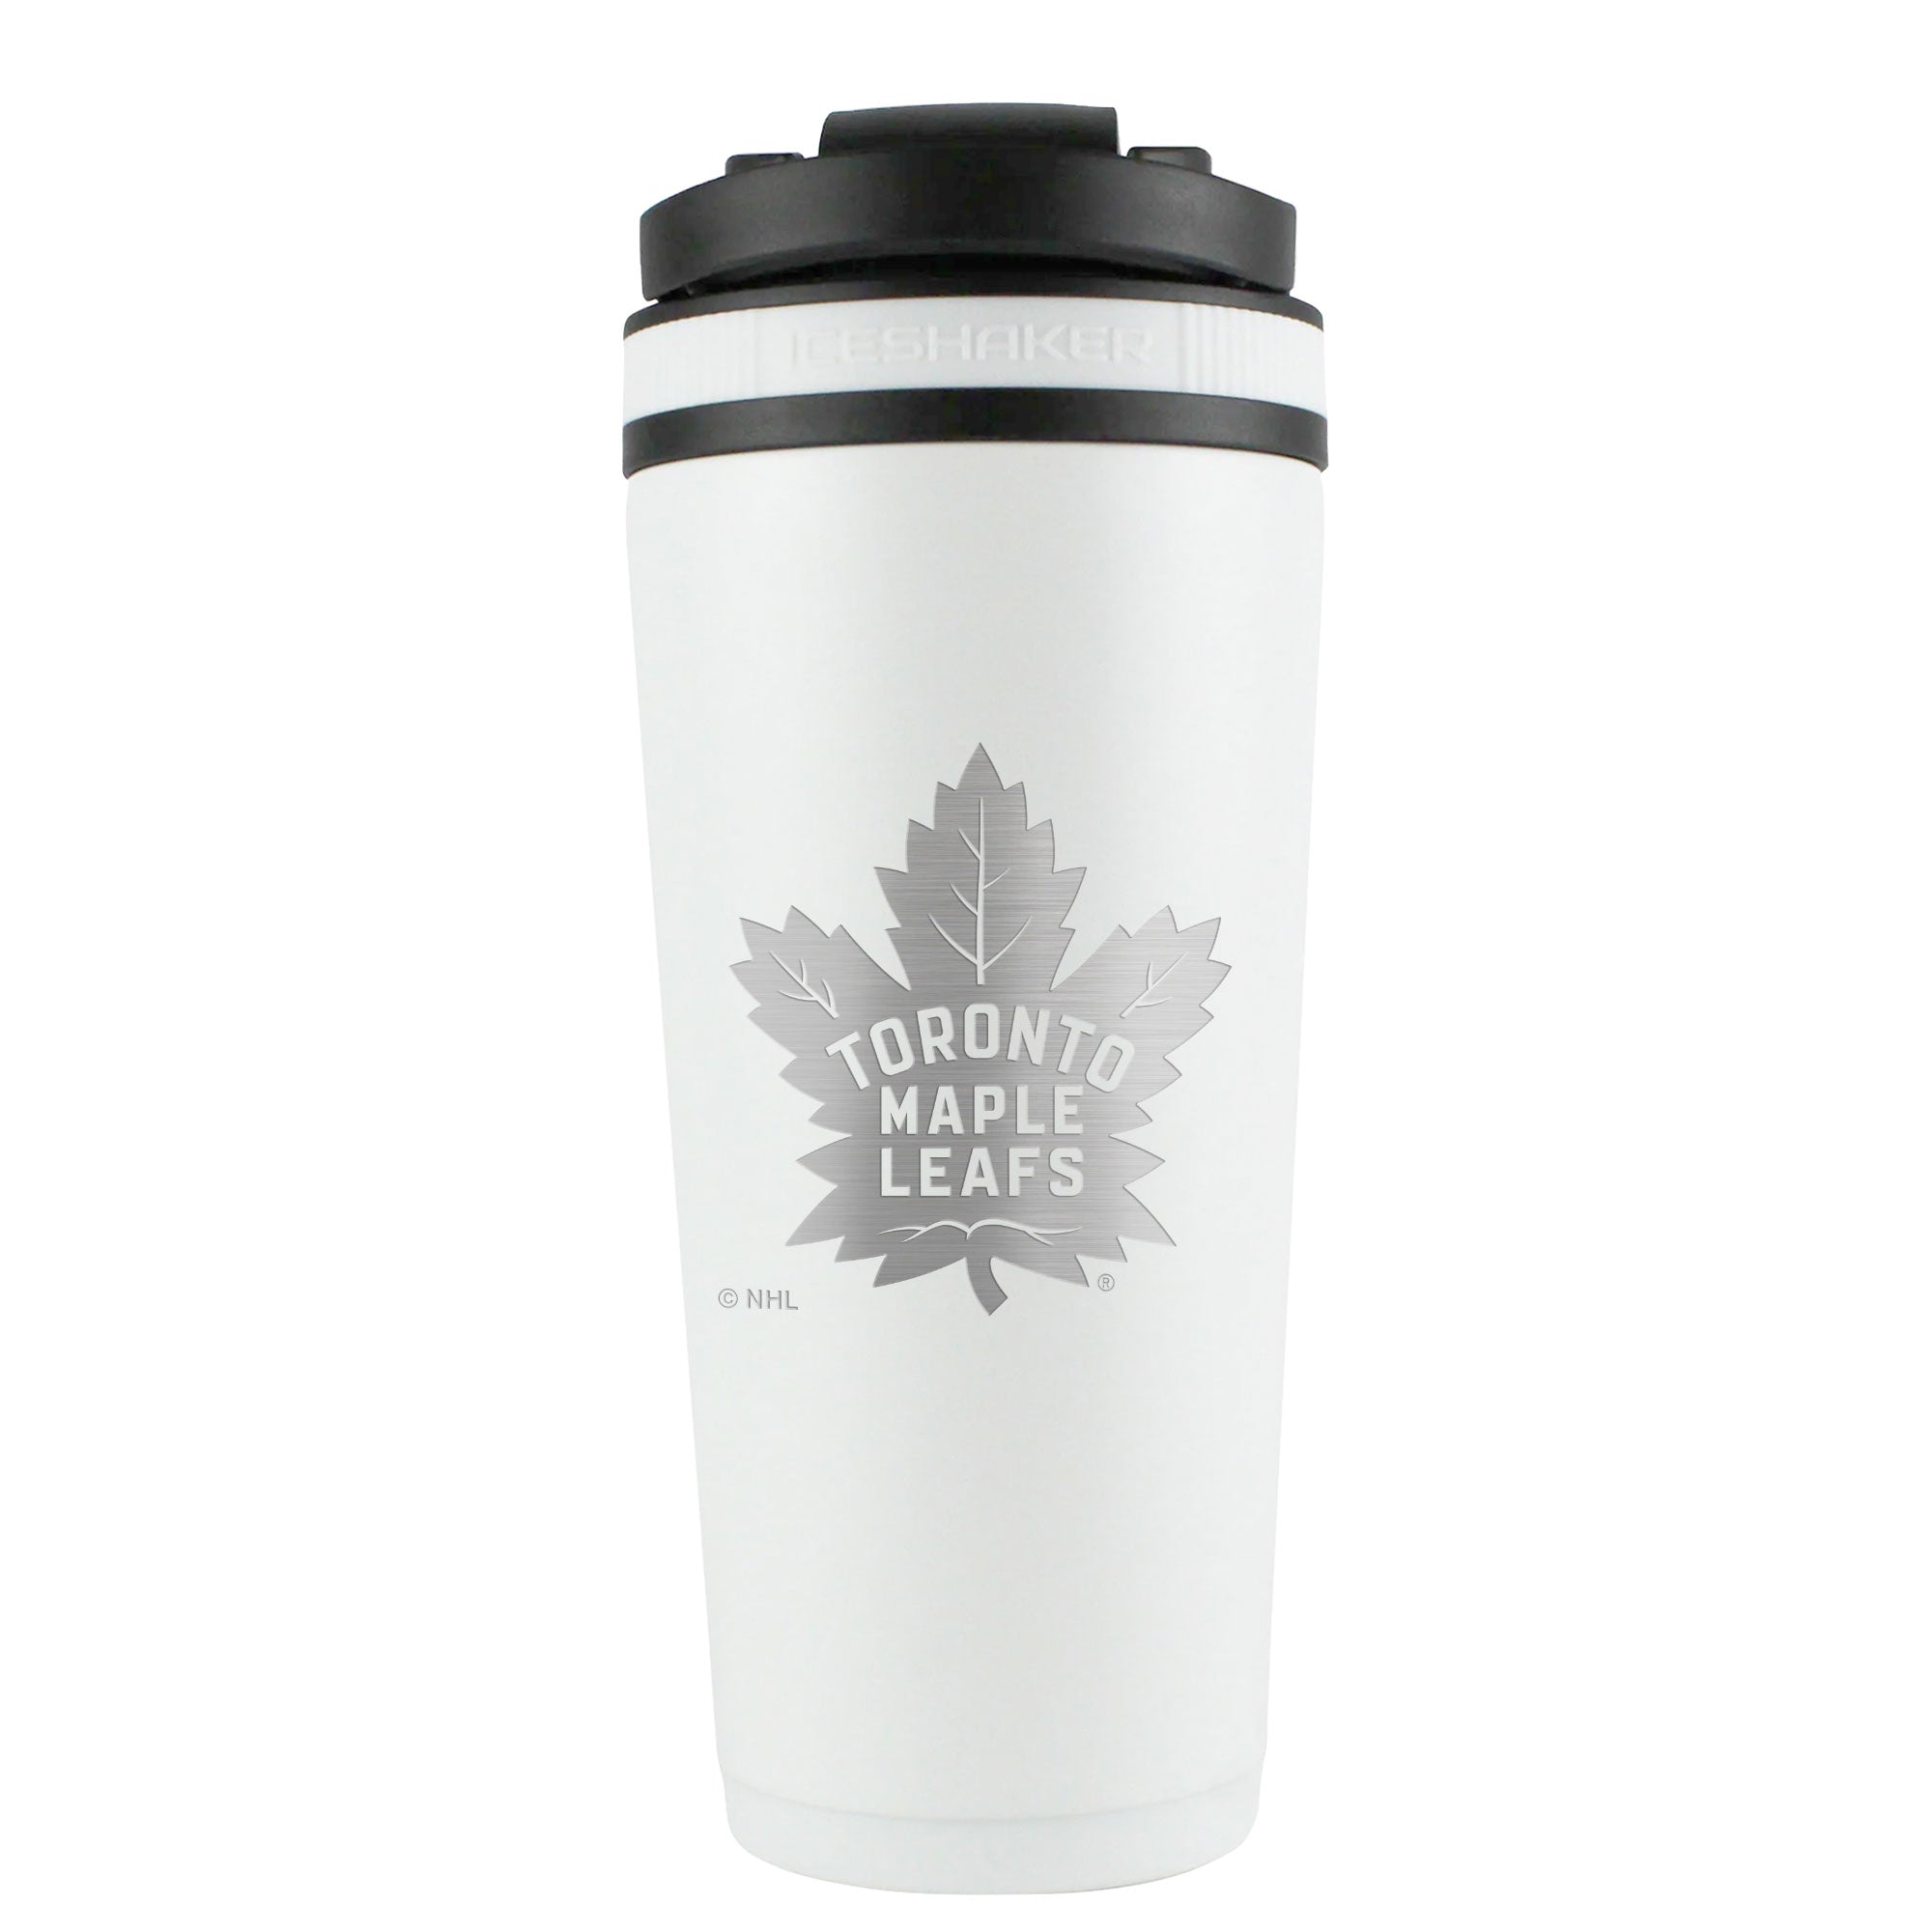 Officially Licensed Toronto Maple Leafs 26oz Ice Shaker